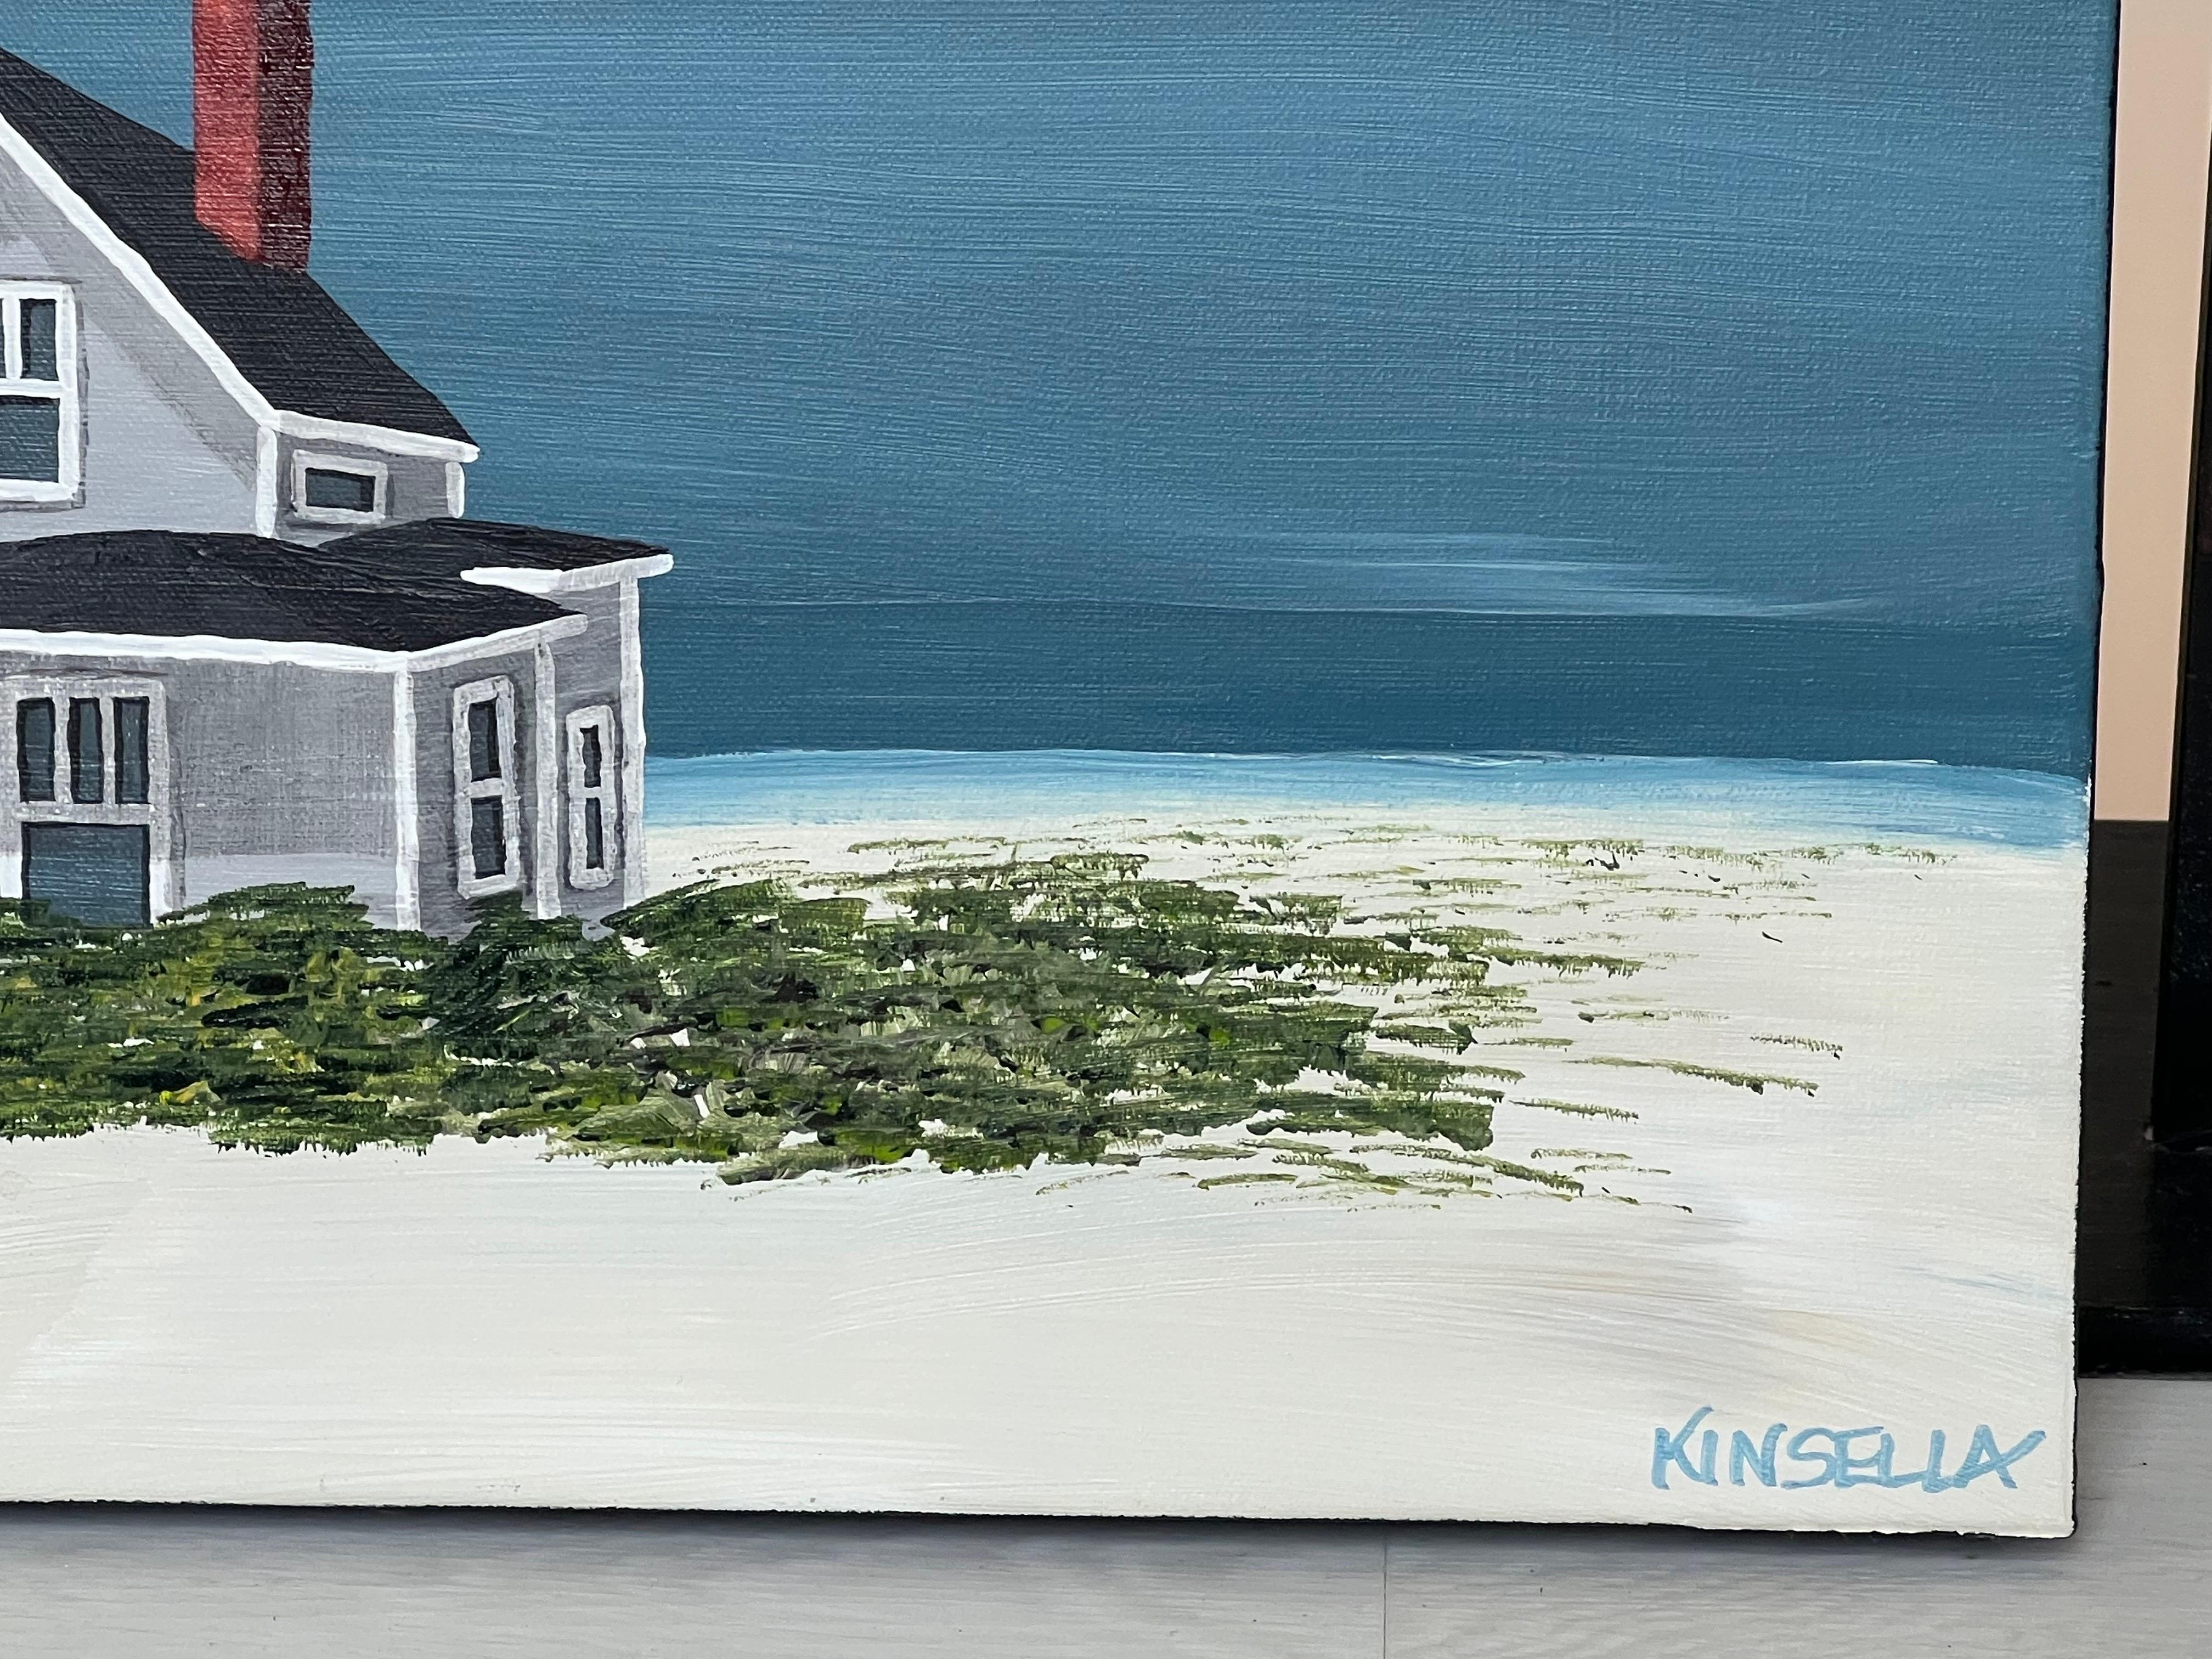  Sweet Memories by Susan Kinsella, Square Landscape Acrylic on Canvas Painting 1